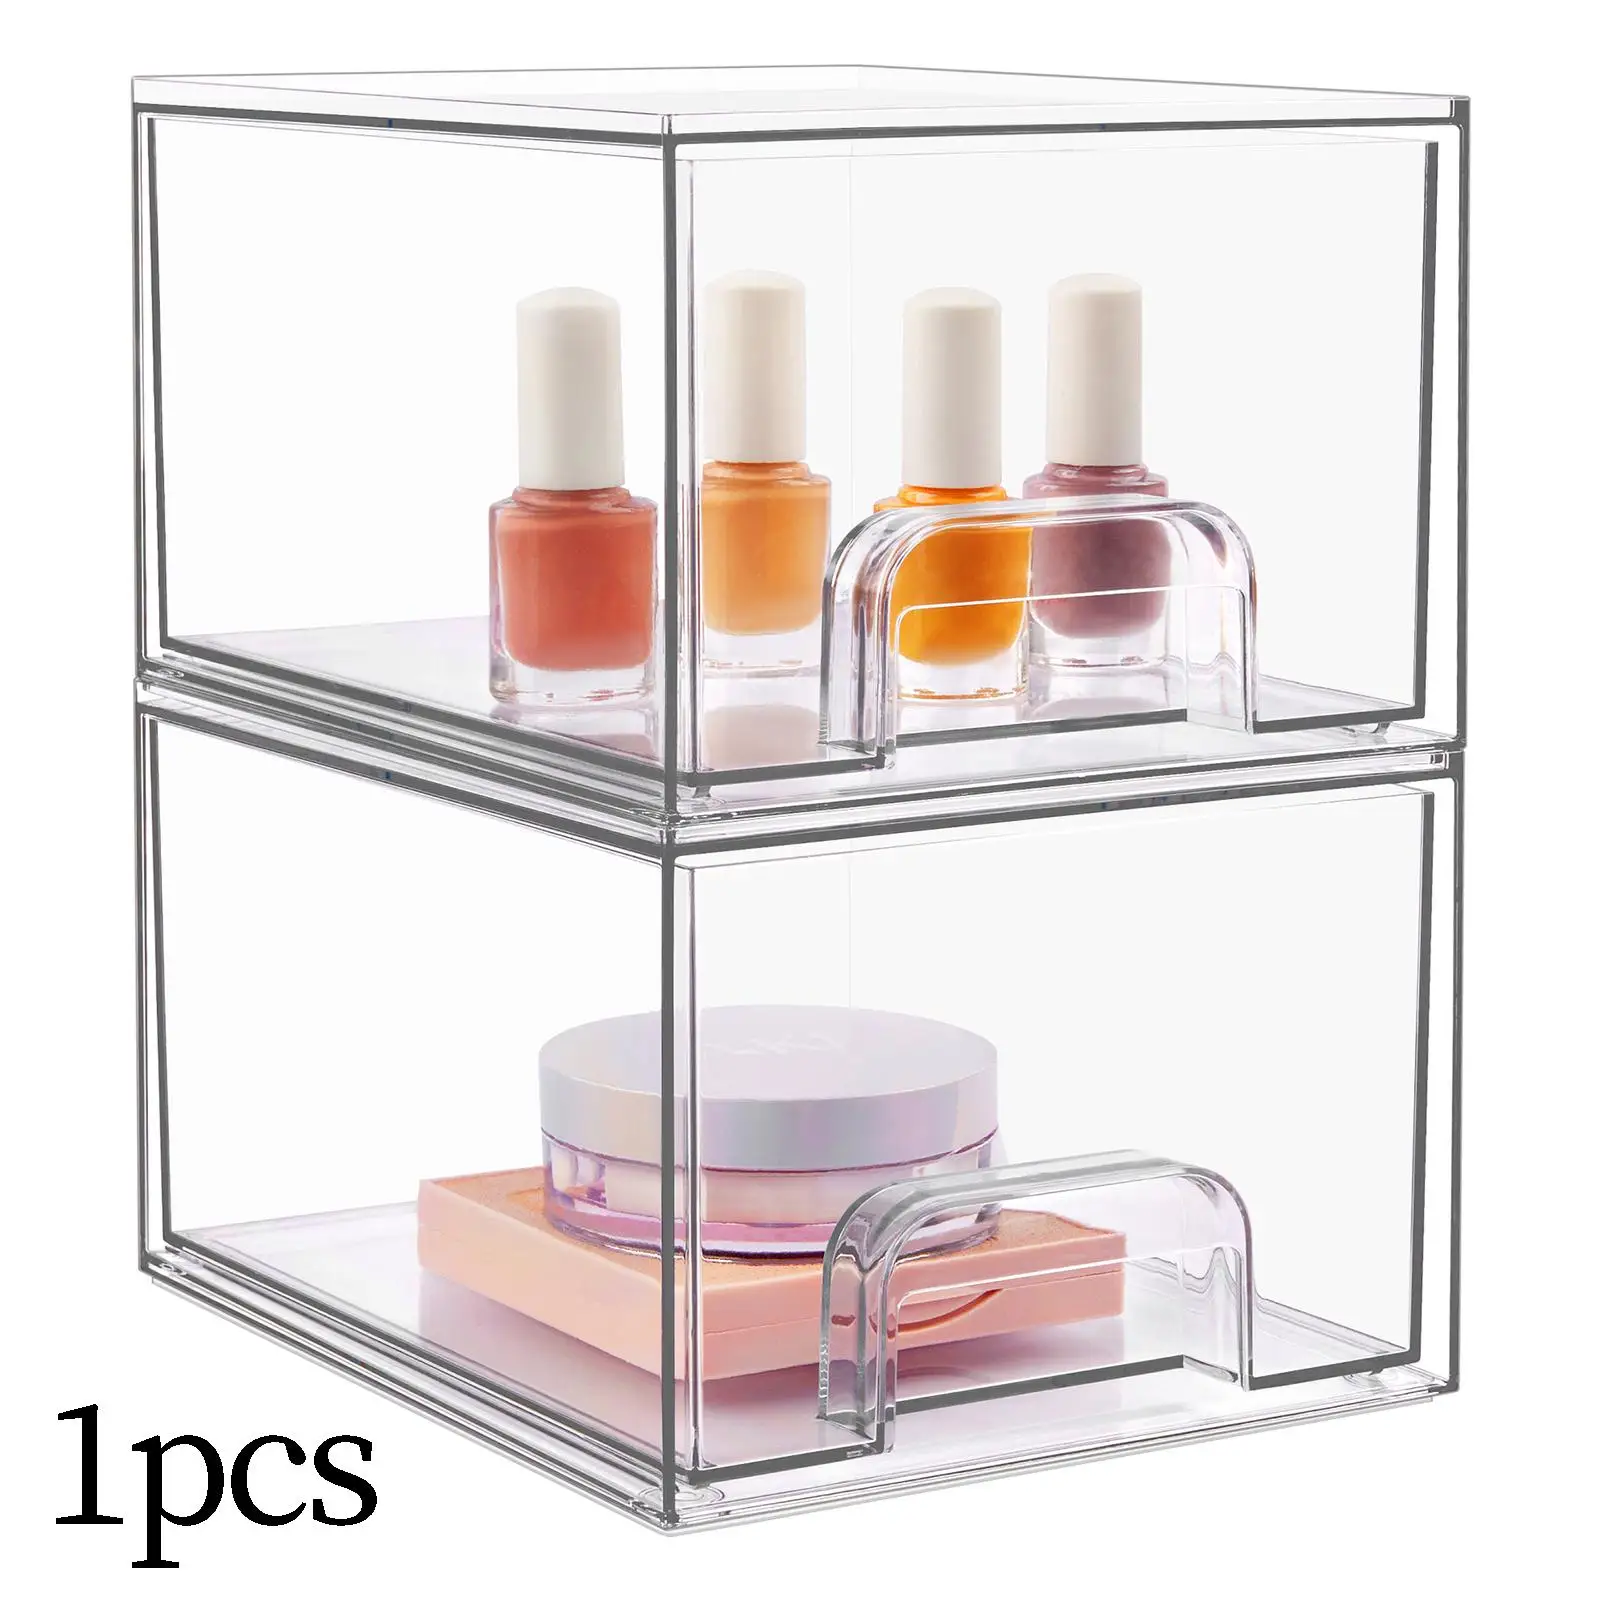 Makeup Organizer Drawers for Bathroom Counter Home Organization and Storage